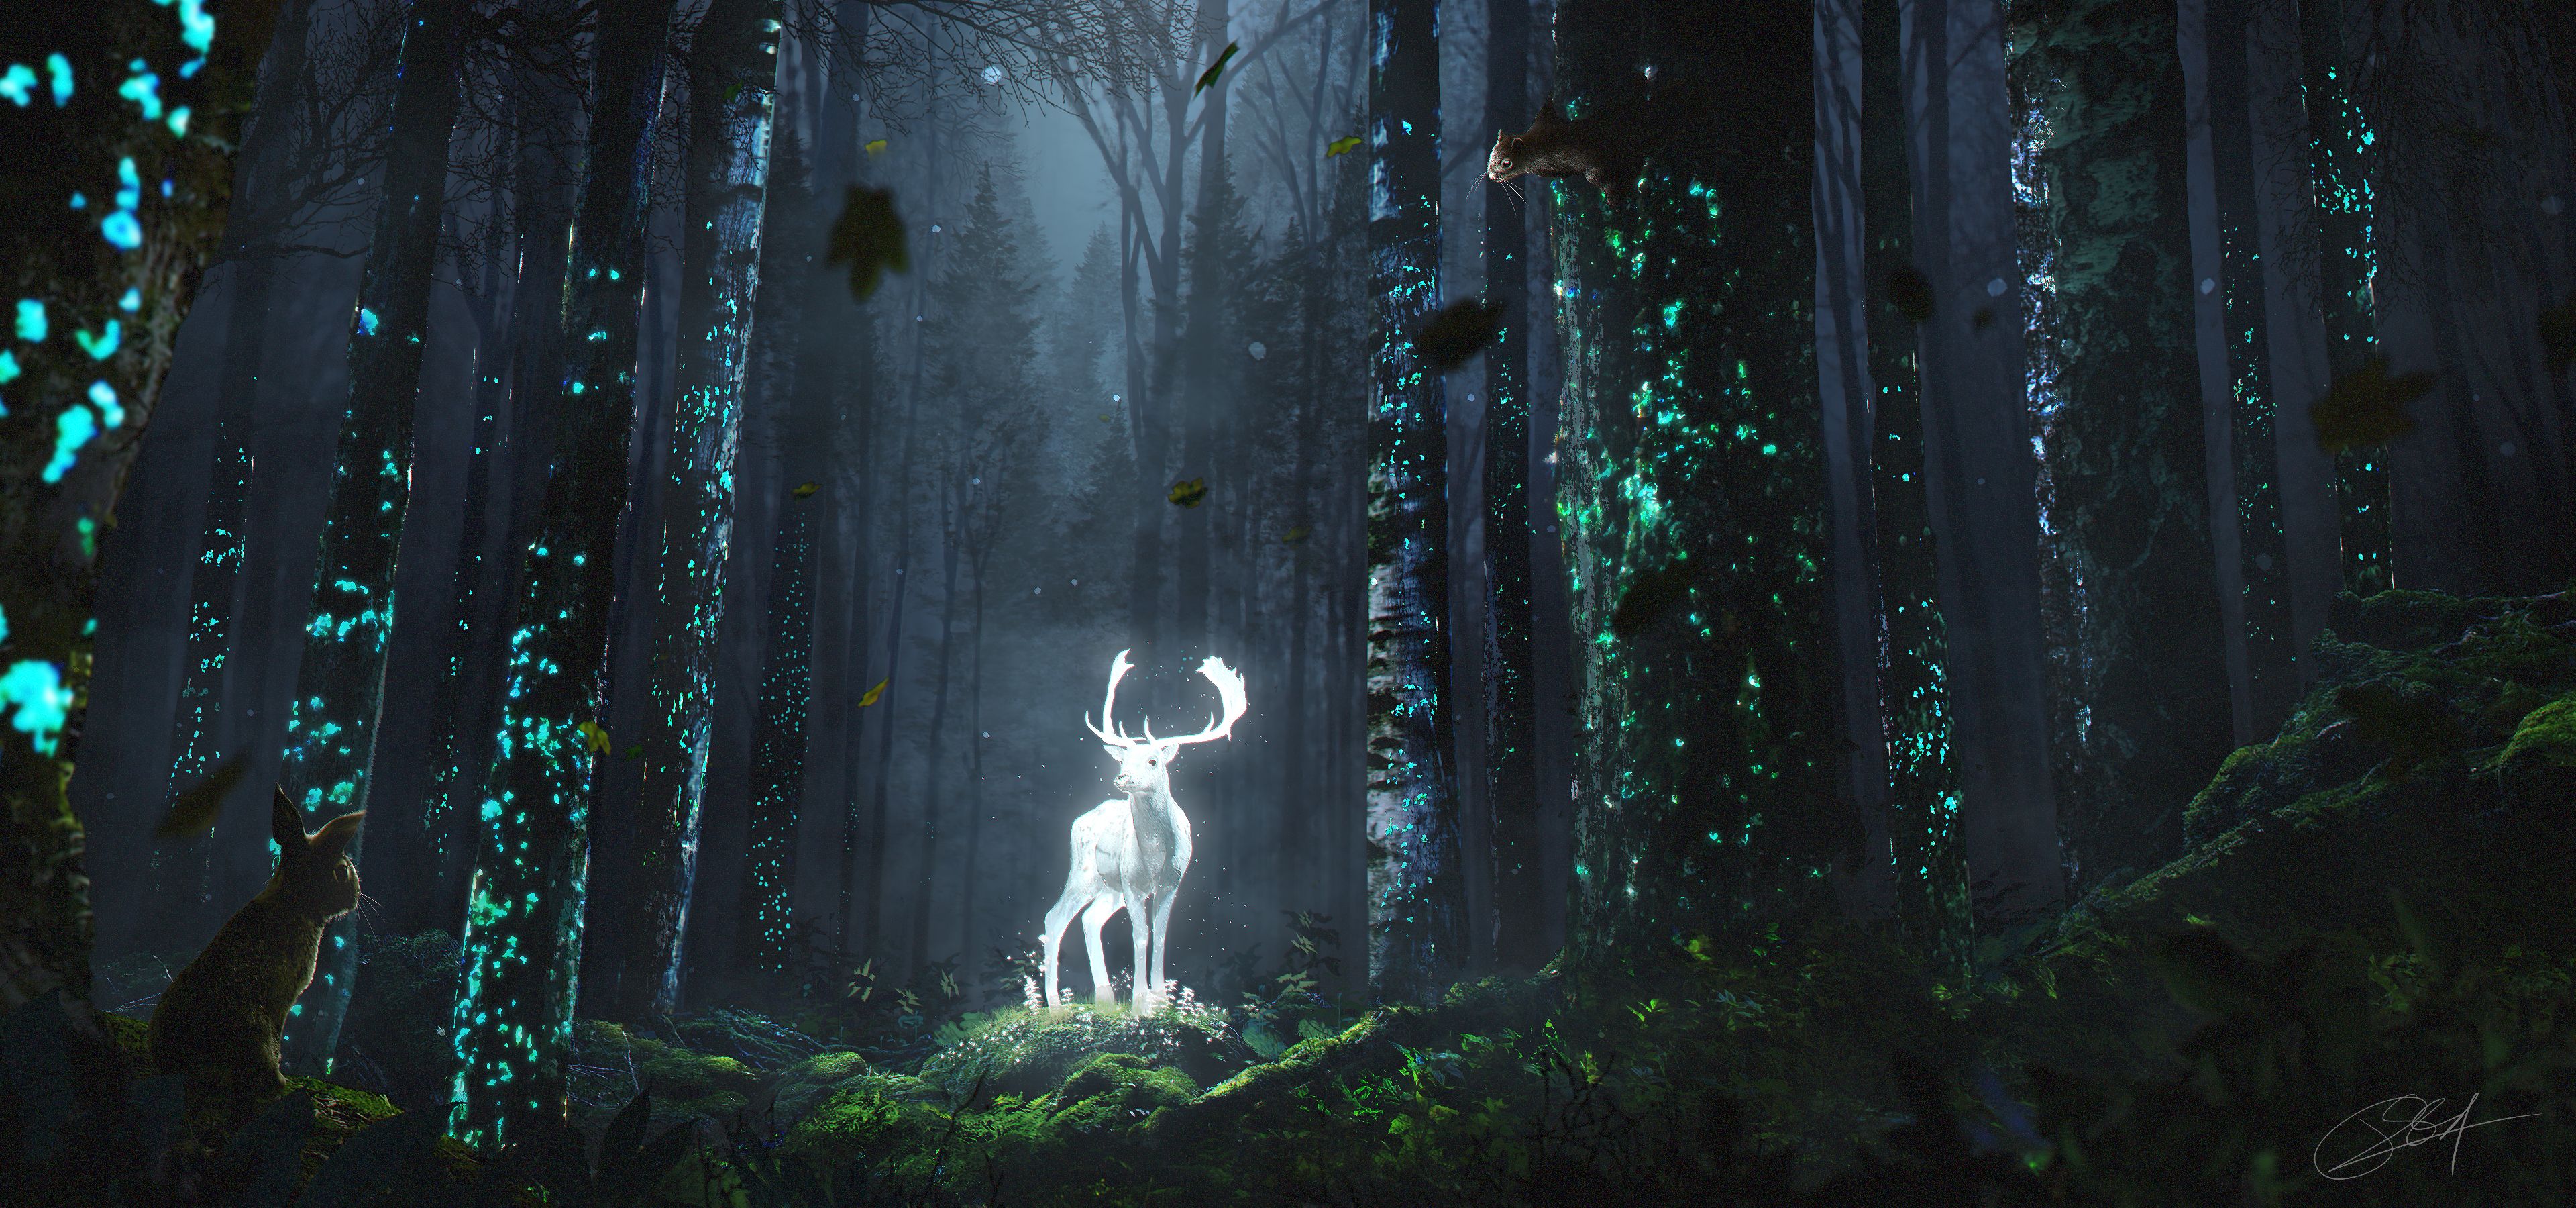 The fantasy forest of the glowing deer HD Wallpaper. Background